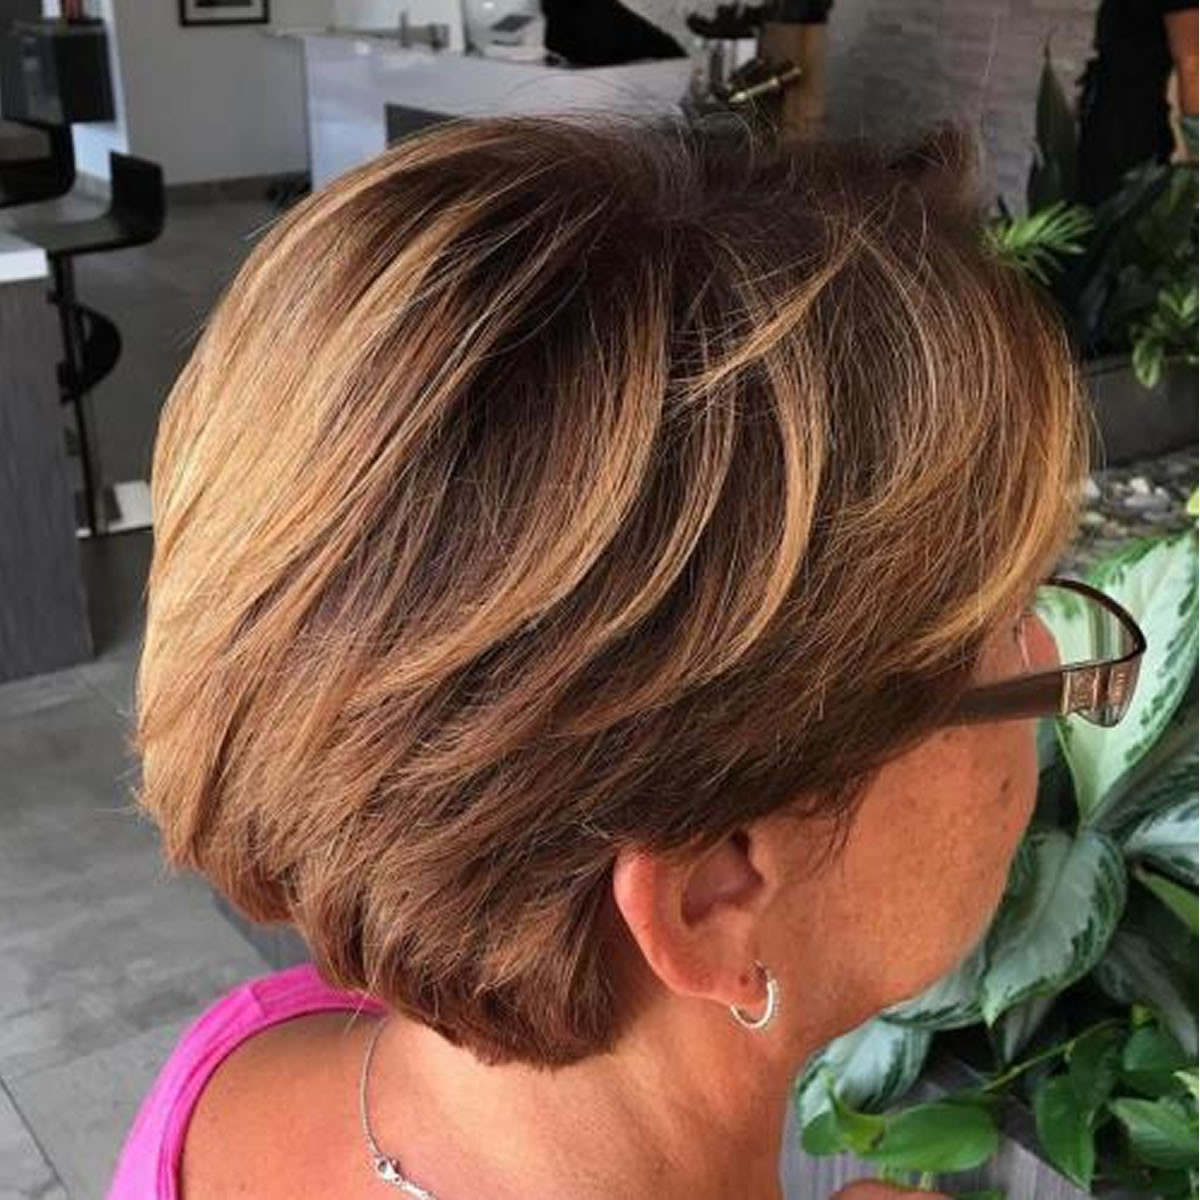 Short Layered Haircuts For Women Over 50
 2020 Haircuts for Older women Over 50 – New Trend Hair